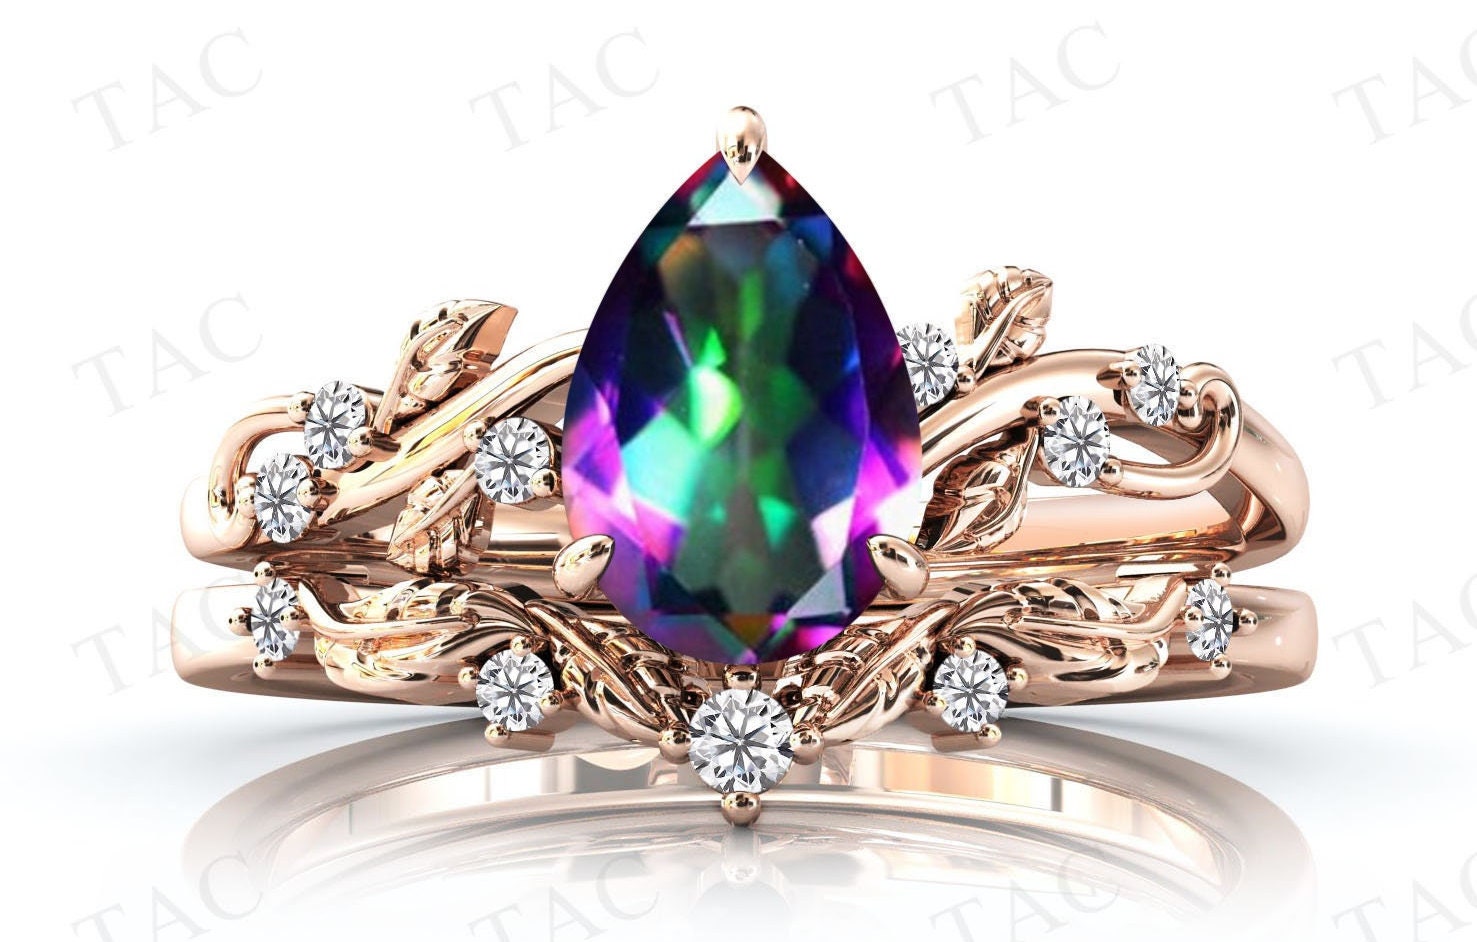 Vintage Bio Color Mystic Topaz Engagement Ring 14k Gold Mystic Topaz  Wedding Ring 925 Silver Mystic Topaz Wedding Anniversary Ring for Women -  Etsy